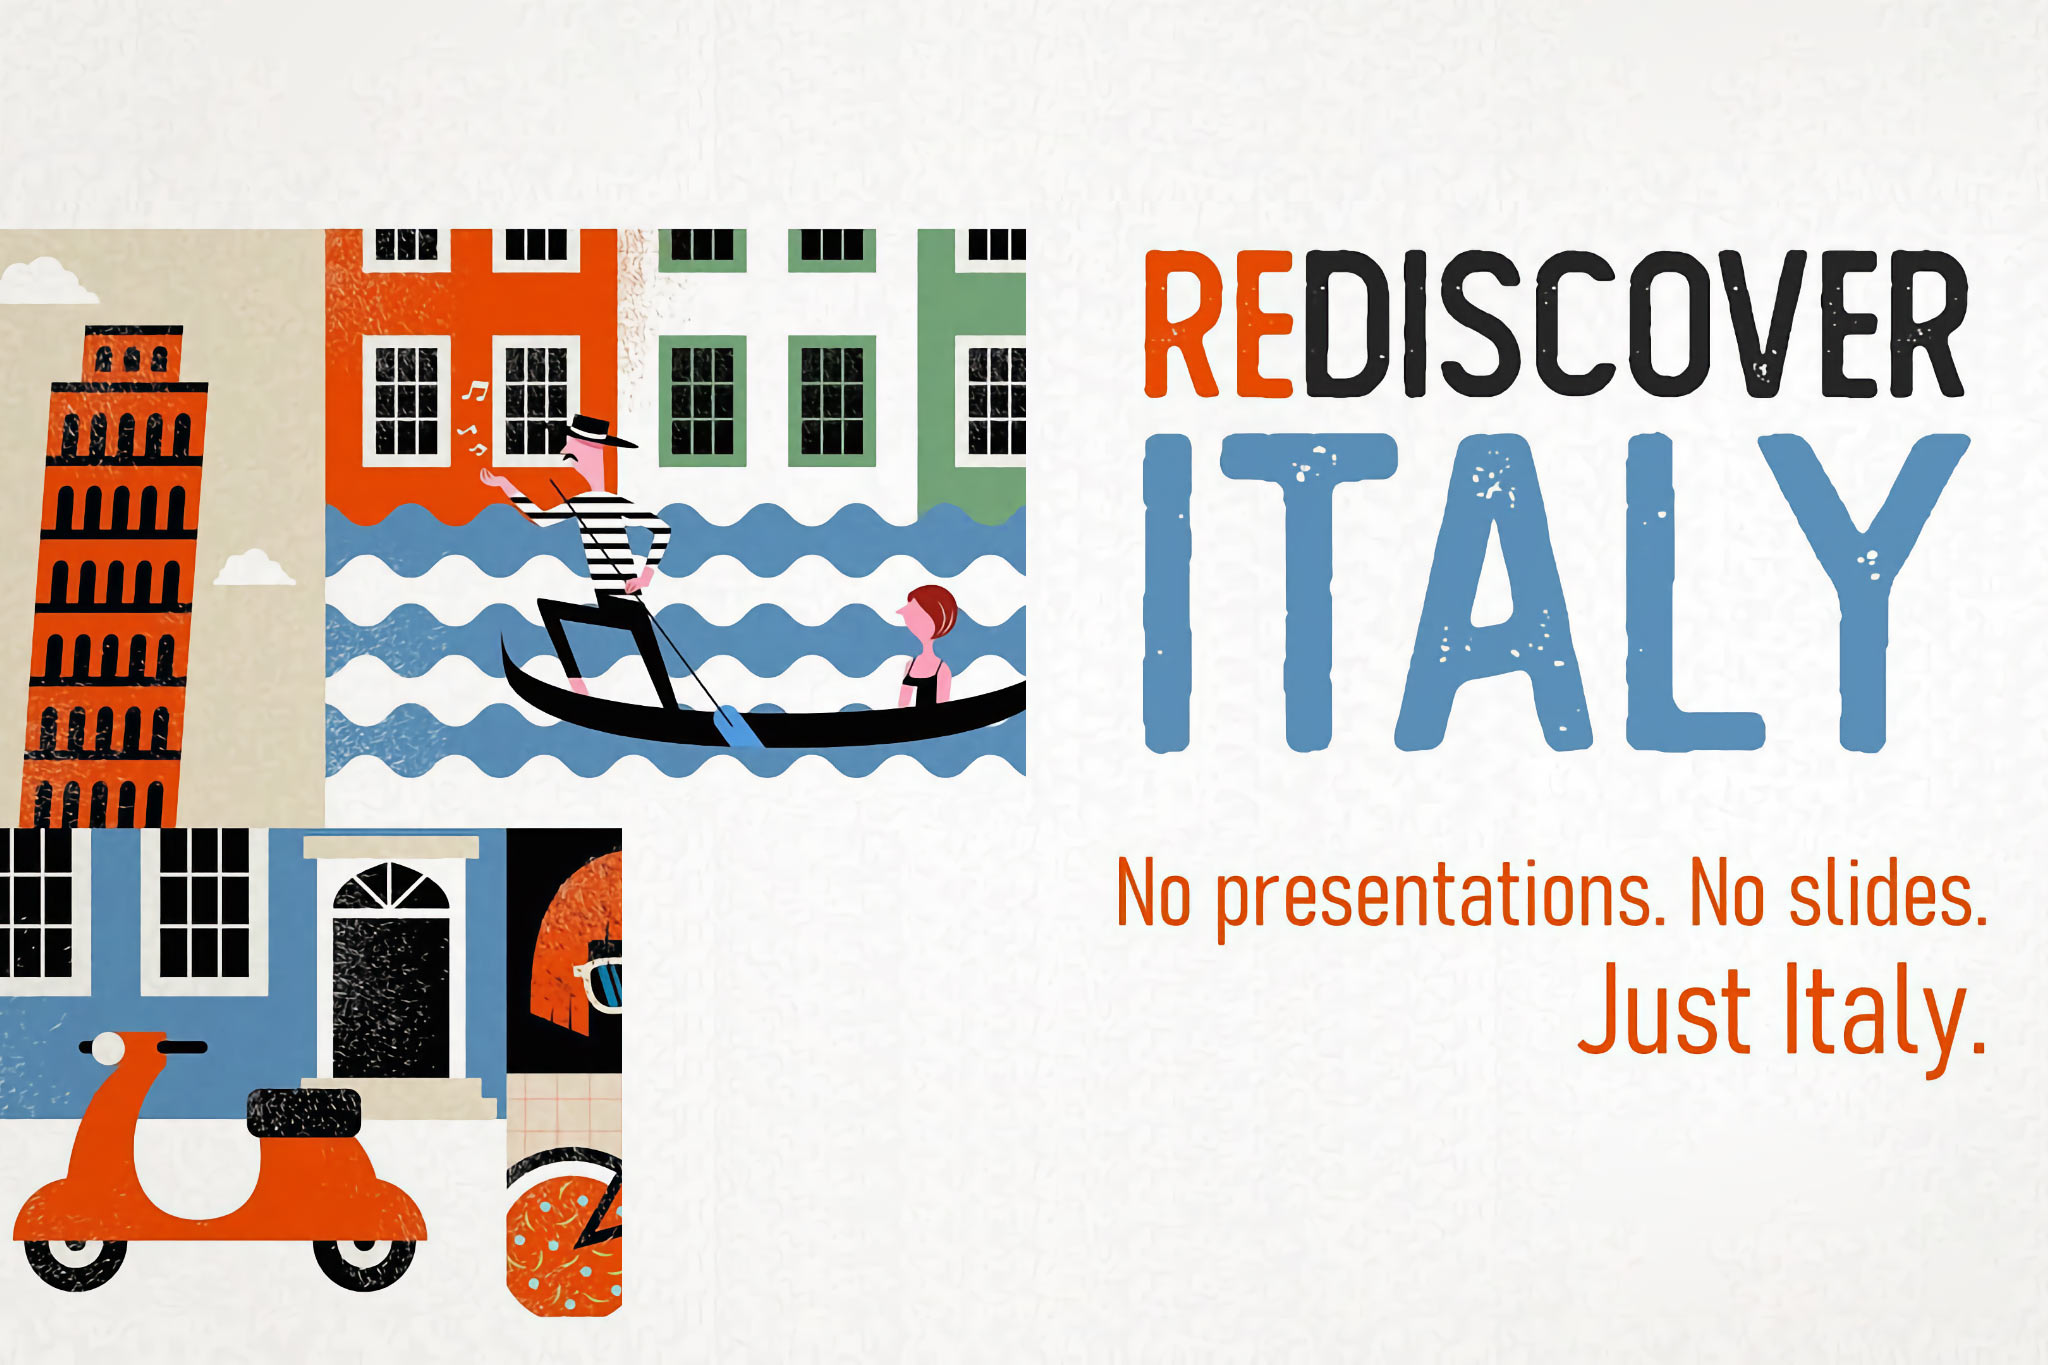 Rediscover Italy graphics